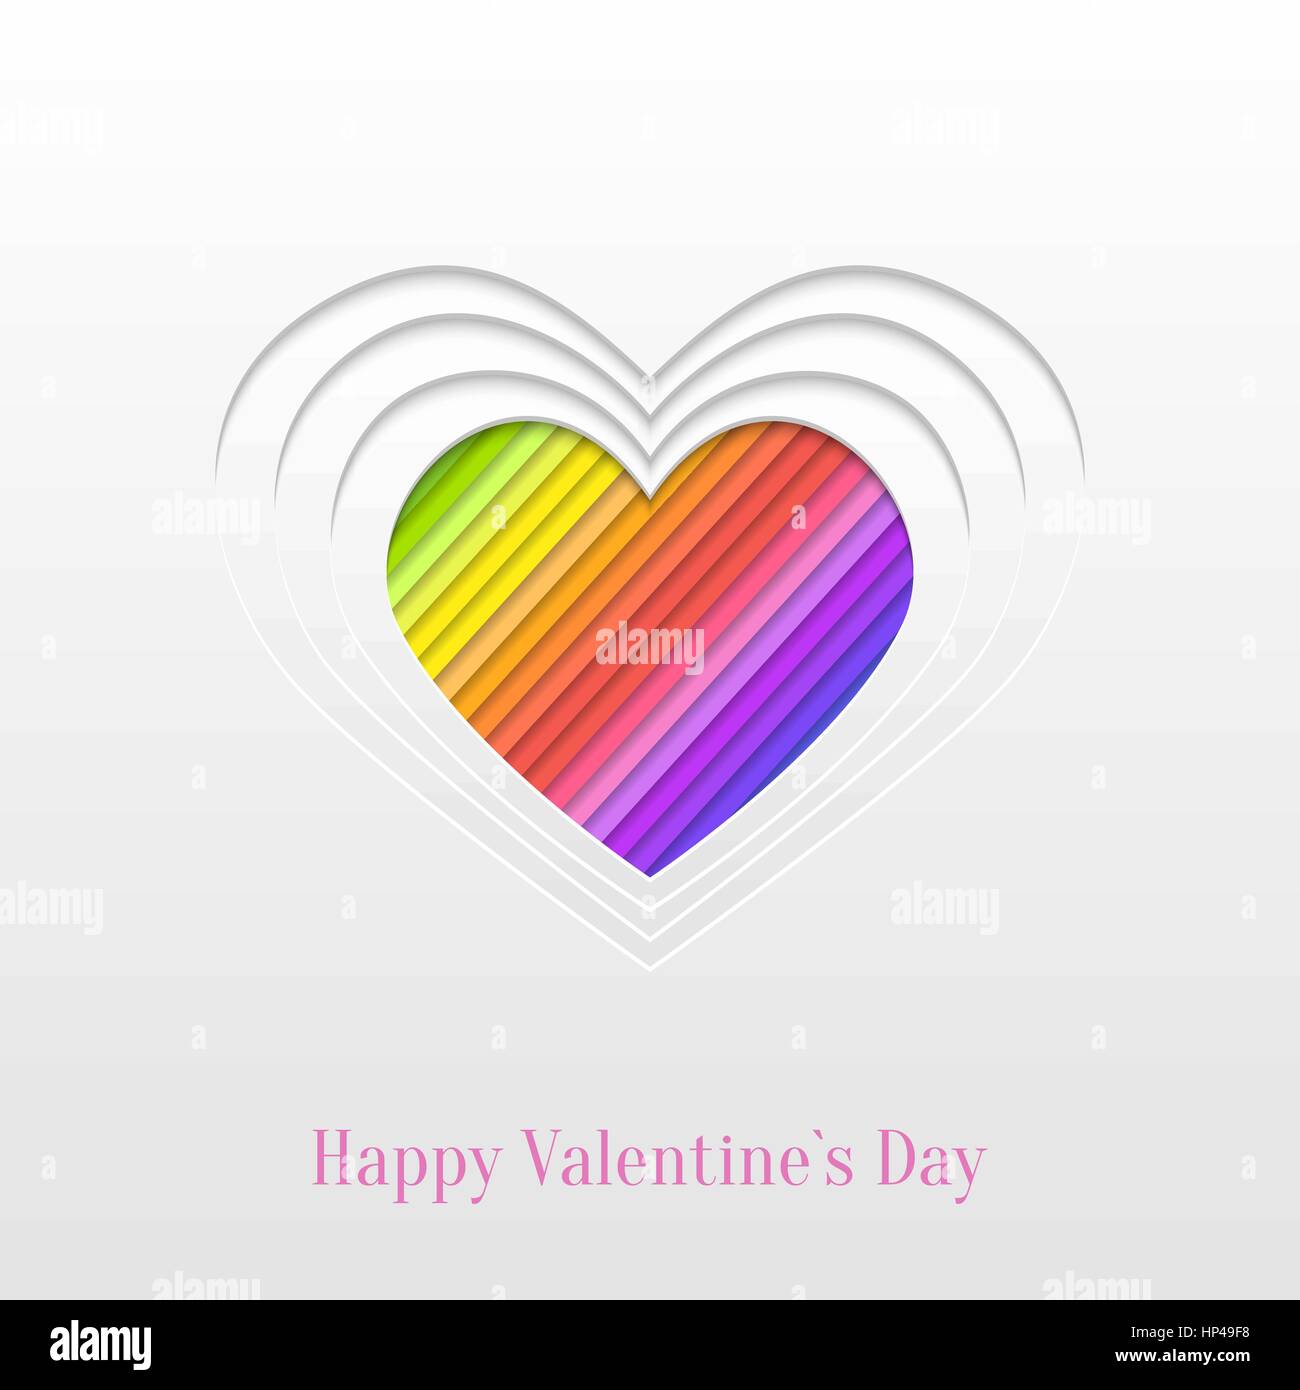 Abstract Paper Cut Valentines Day Heart Background, Trendy Greeting Card or Invitation Design Template Stock Vector